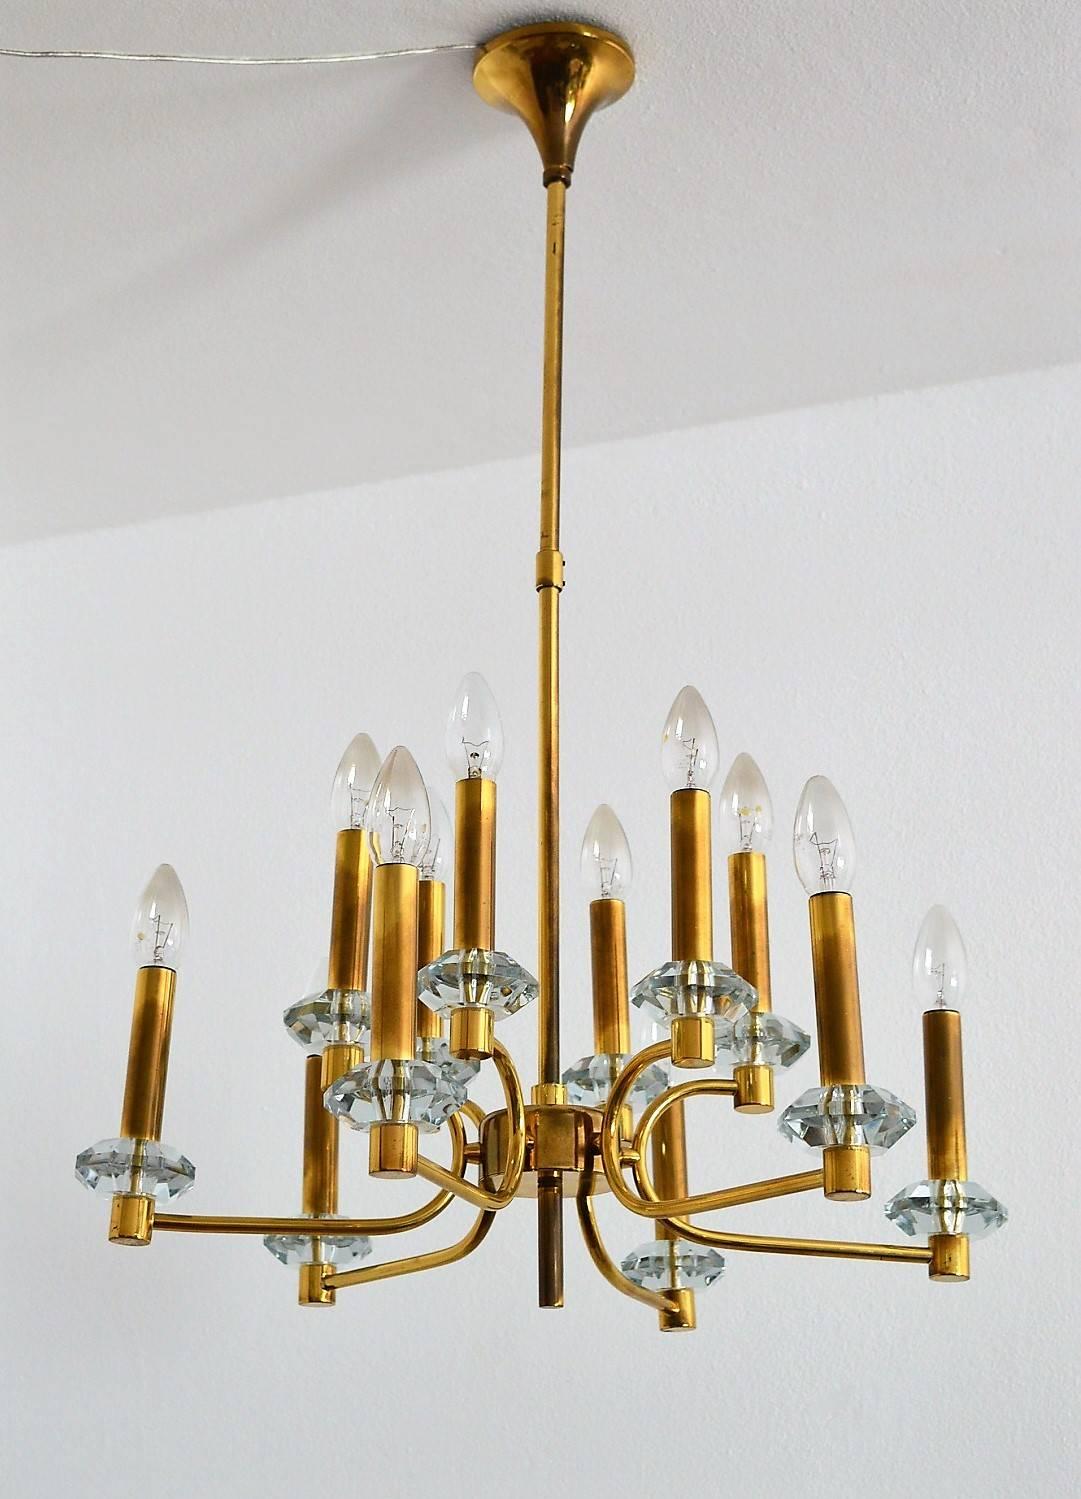 Beautiful and elegant full brass chandelier made in Germany in the 1960s, with six double arms, and on each arm two lights.
The twelve candelabra bulb holders are inserted in long brass pipes, which are positioned on edged glass blocks.
The brass